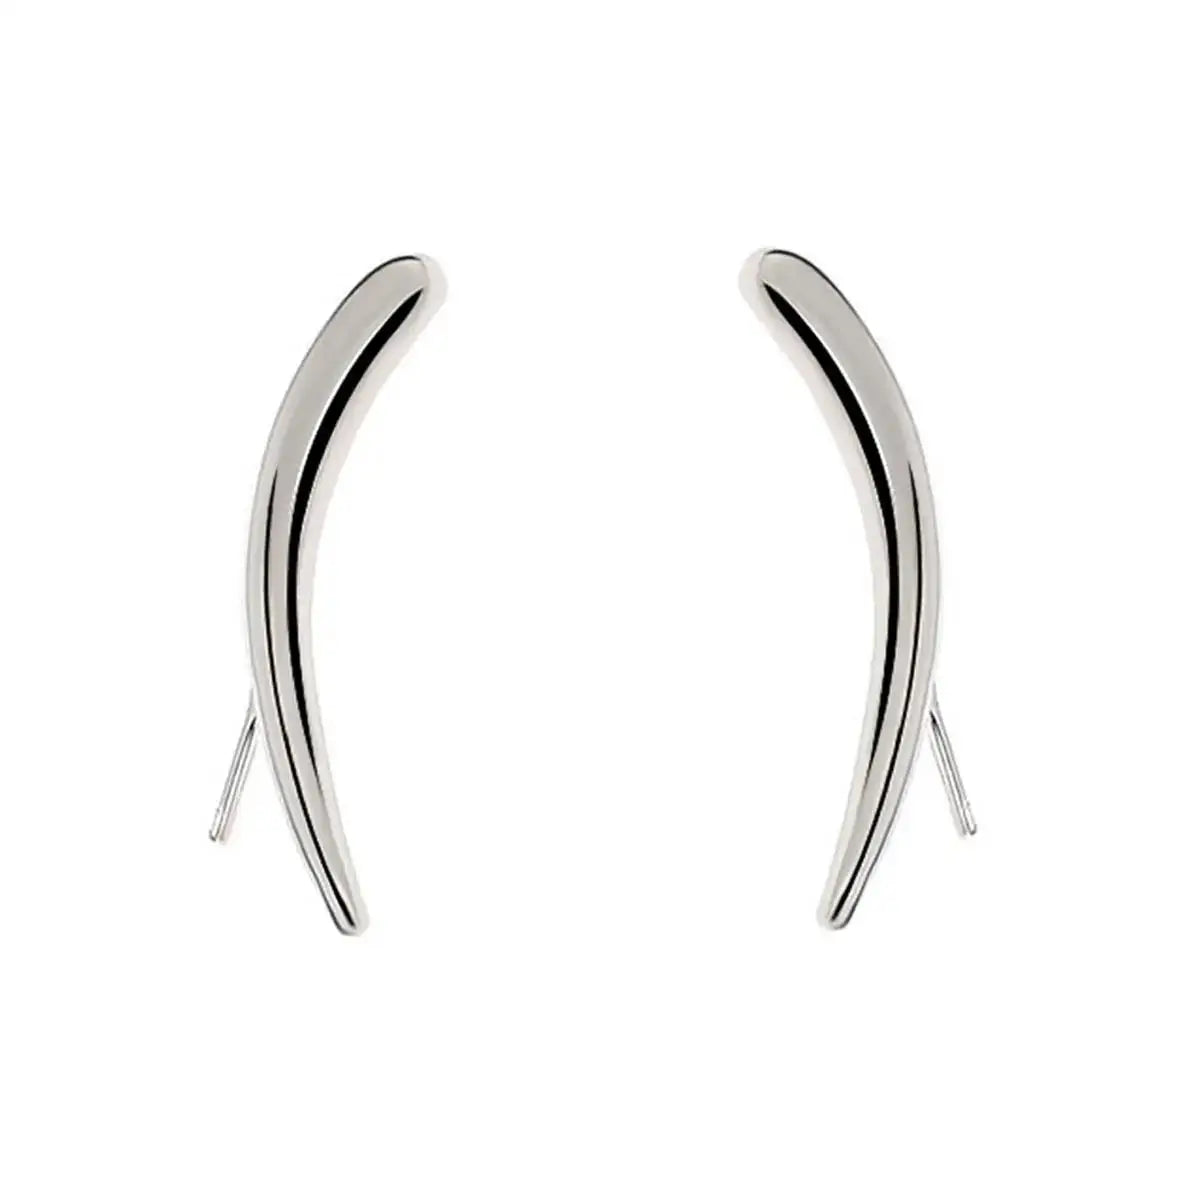 Curved Earrings - ÉclatMystique